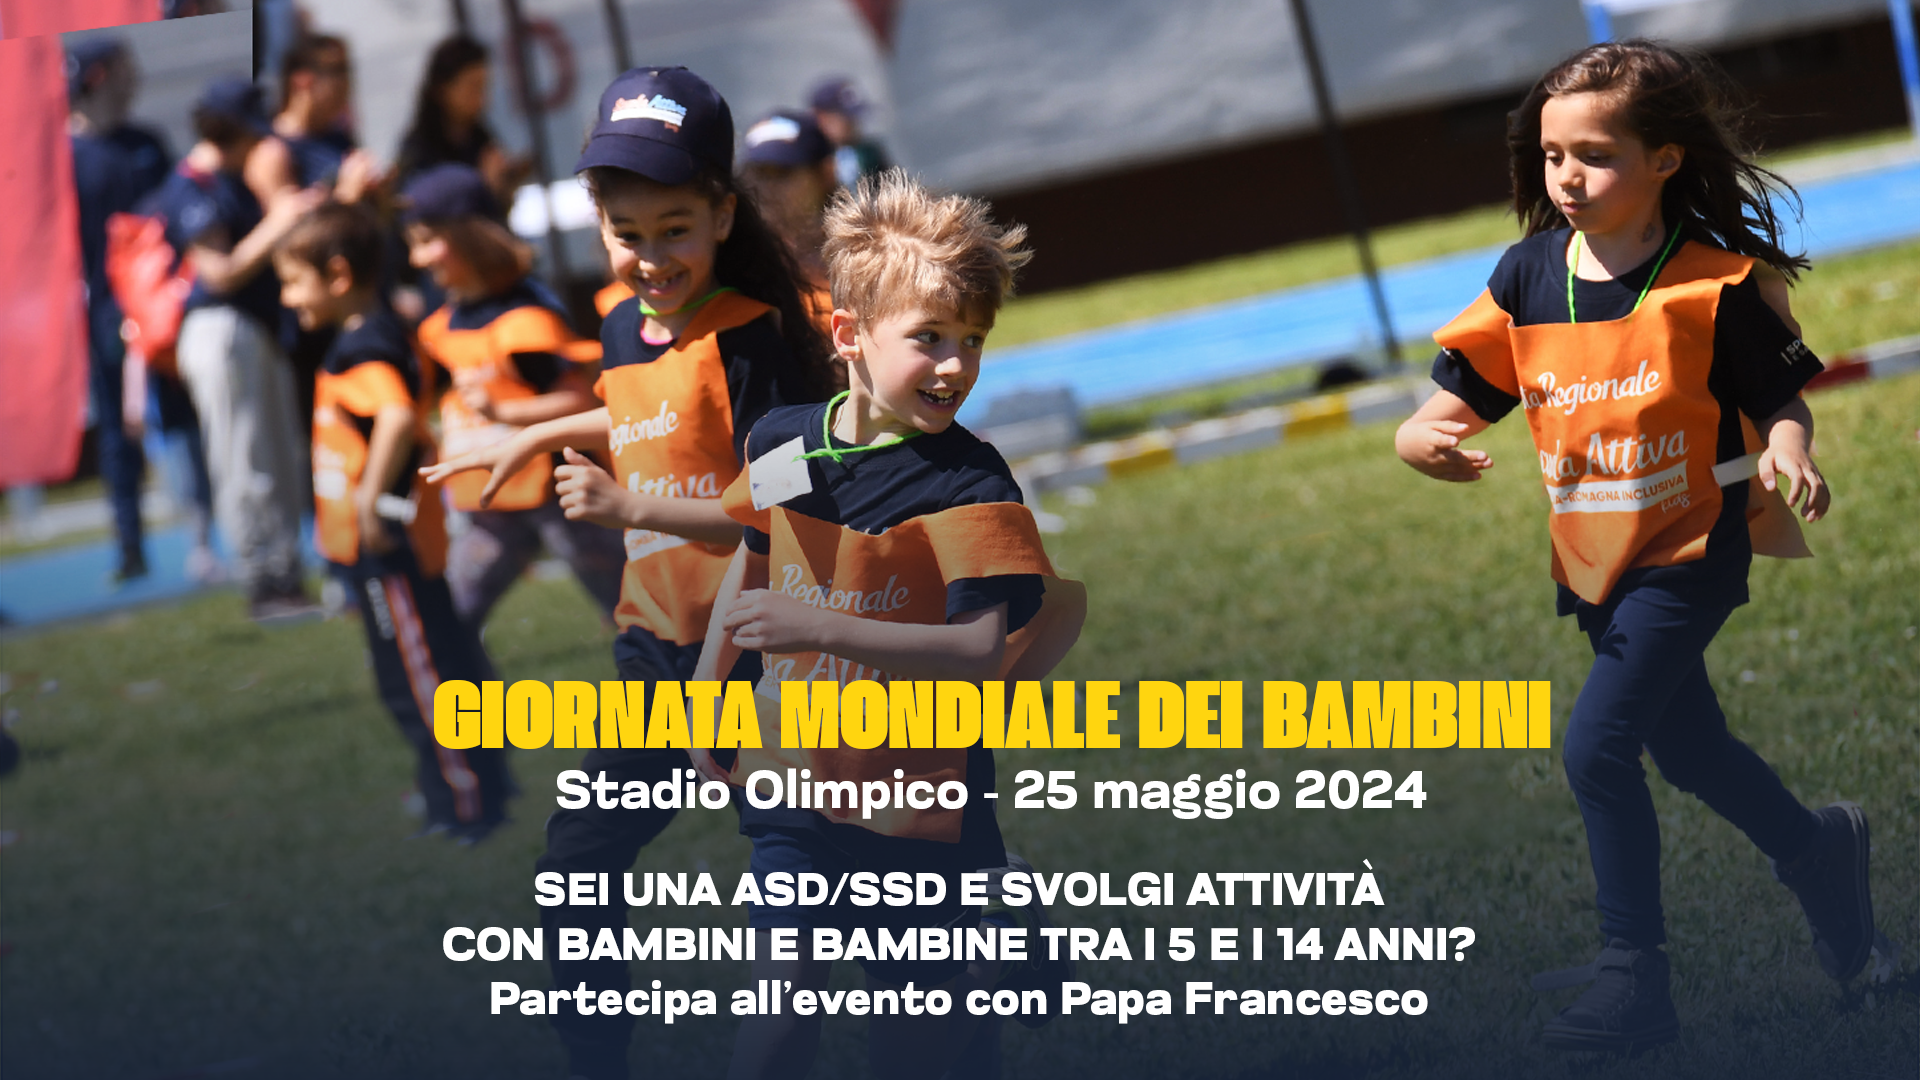 World Children’s Day.  On Saturday 25 May the Olympic Stadium hosts the meeting between Pope Francis and children aged 5 to 14